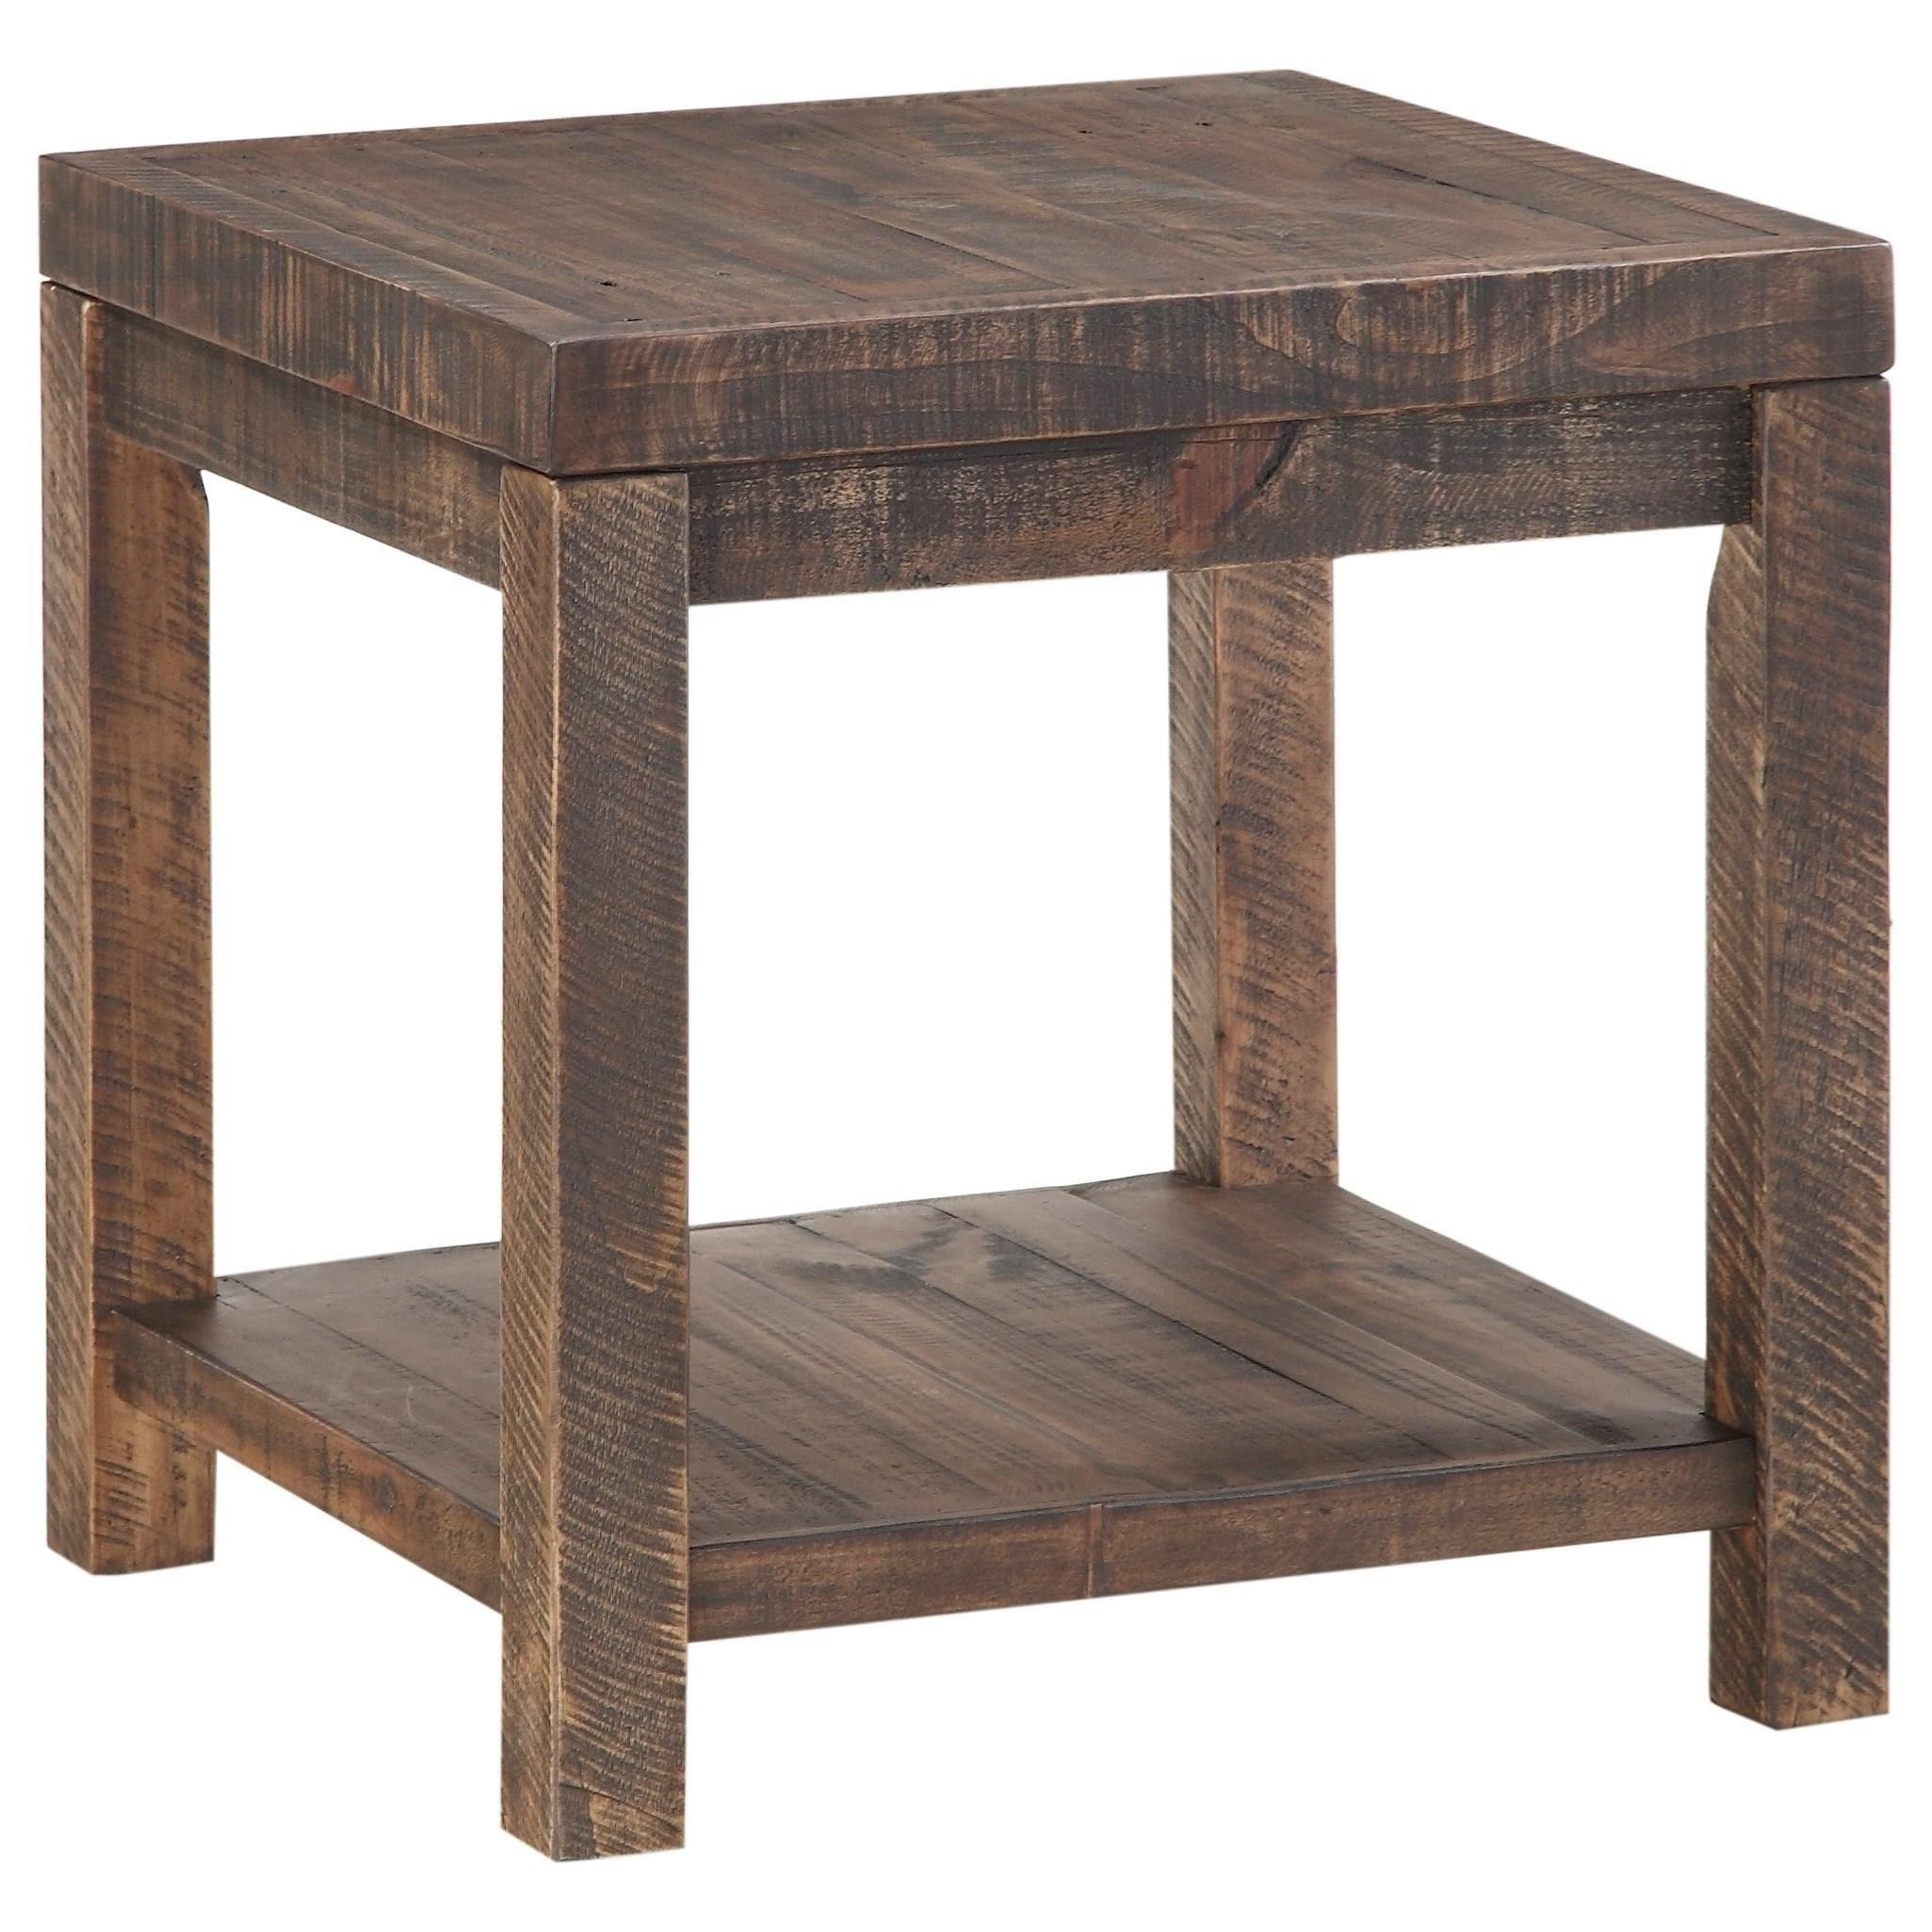 Farmhouse End Table CRASTER 8S3922 in Smoke, Taupe 